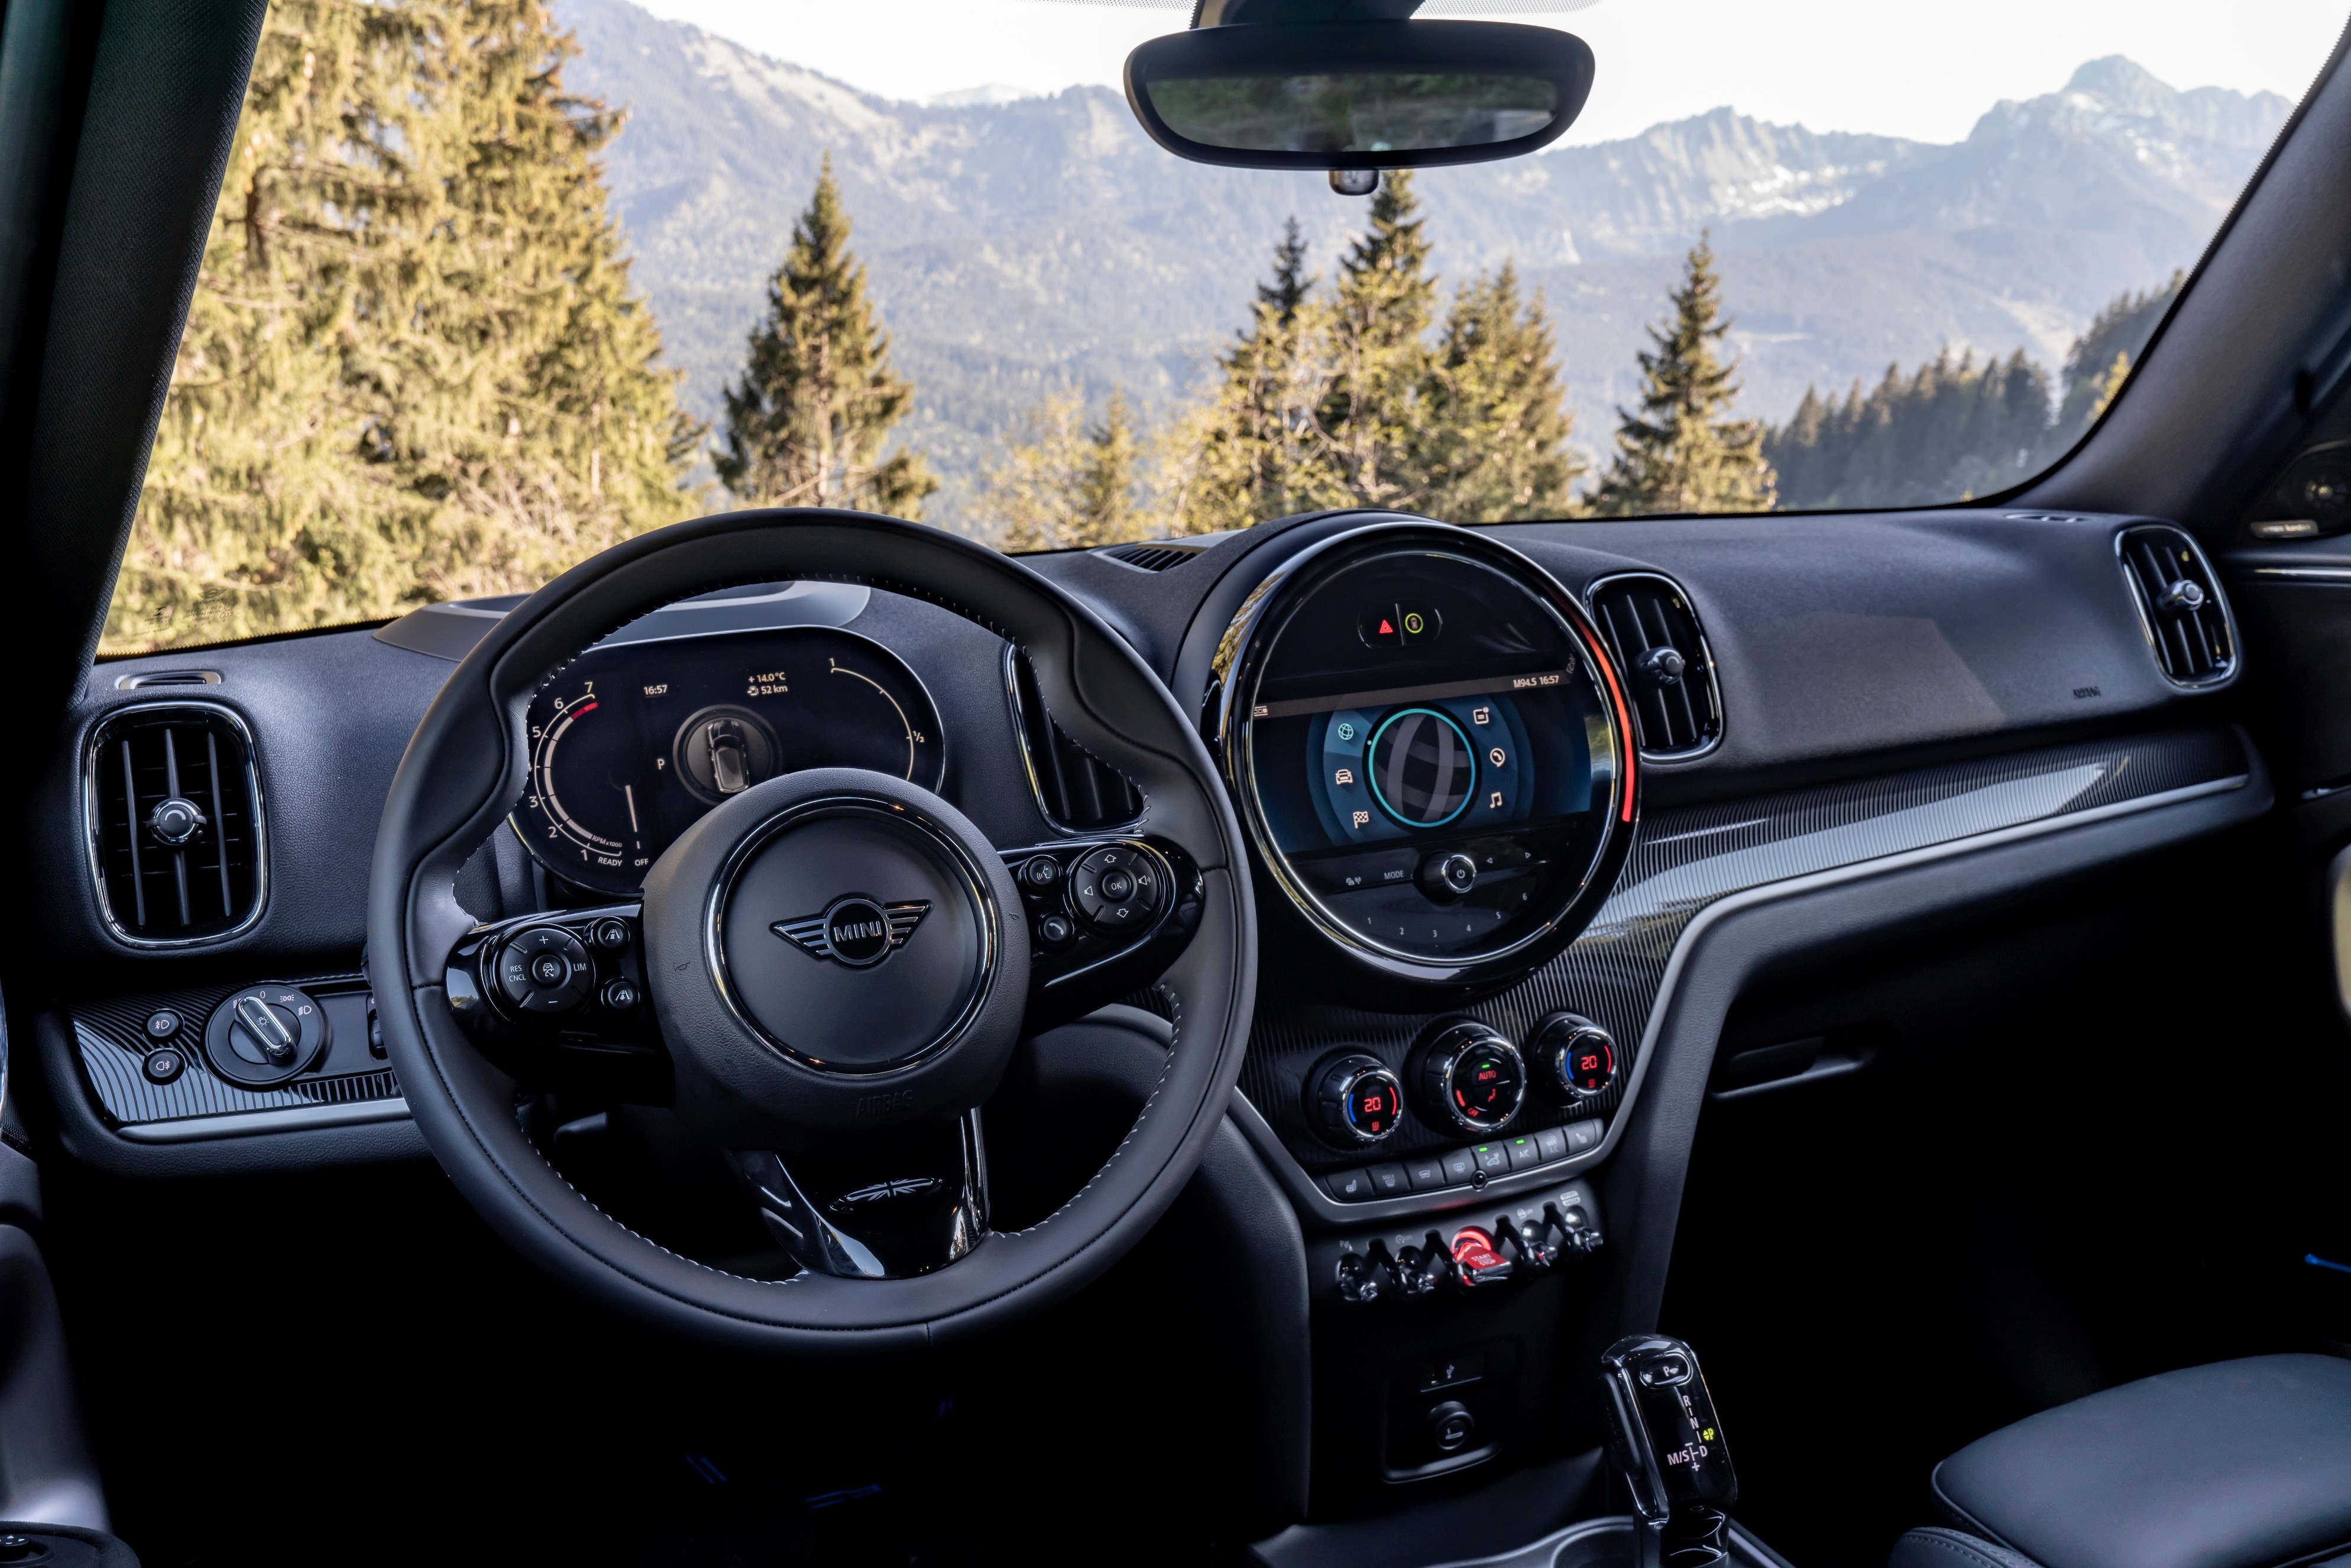 2021 MINI Countryman Facelift Revealed With Small Styling Changes, JCW ...